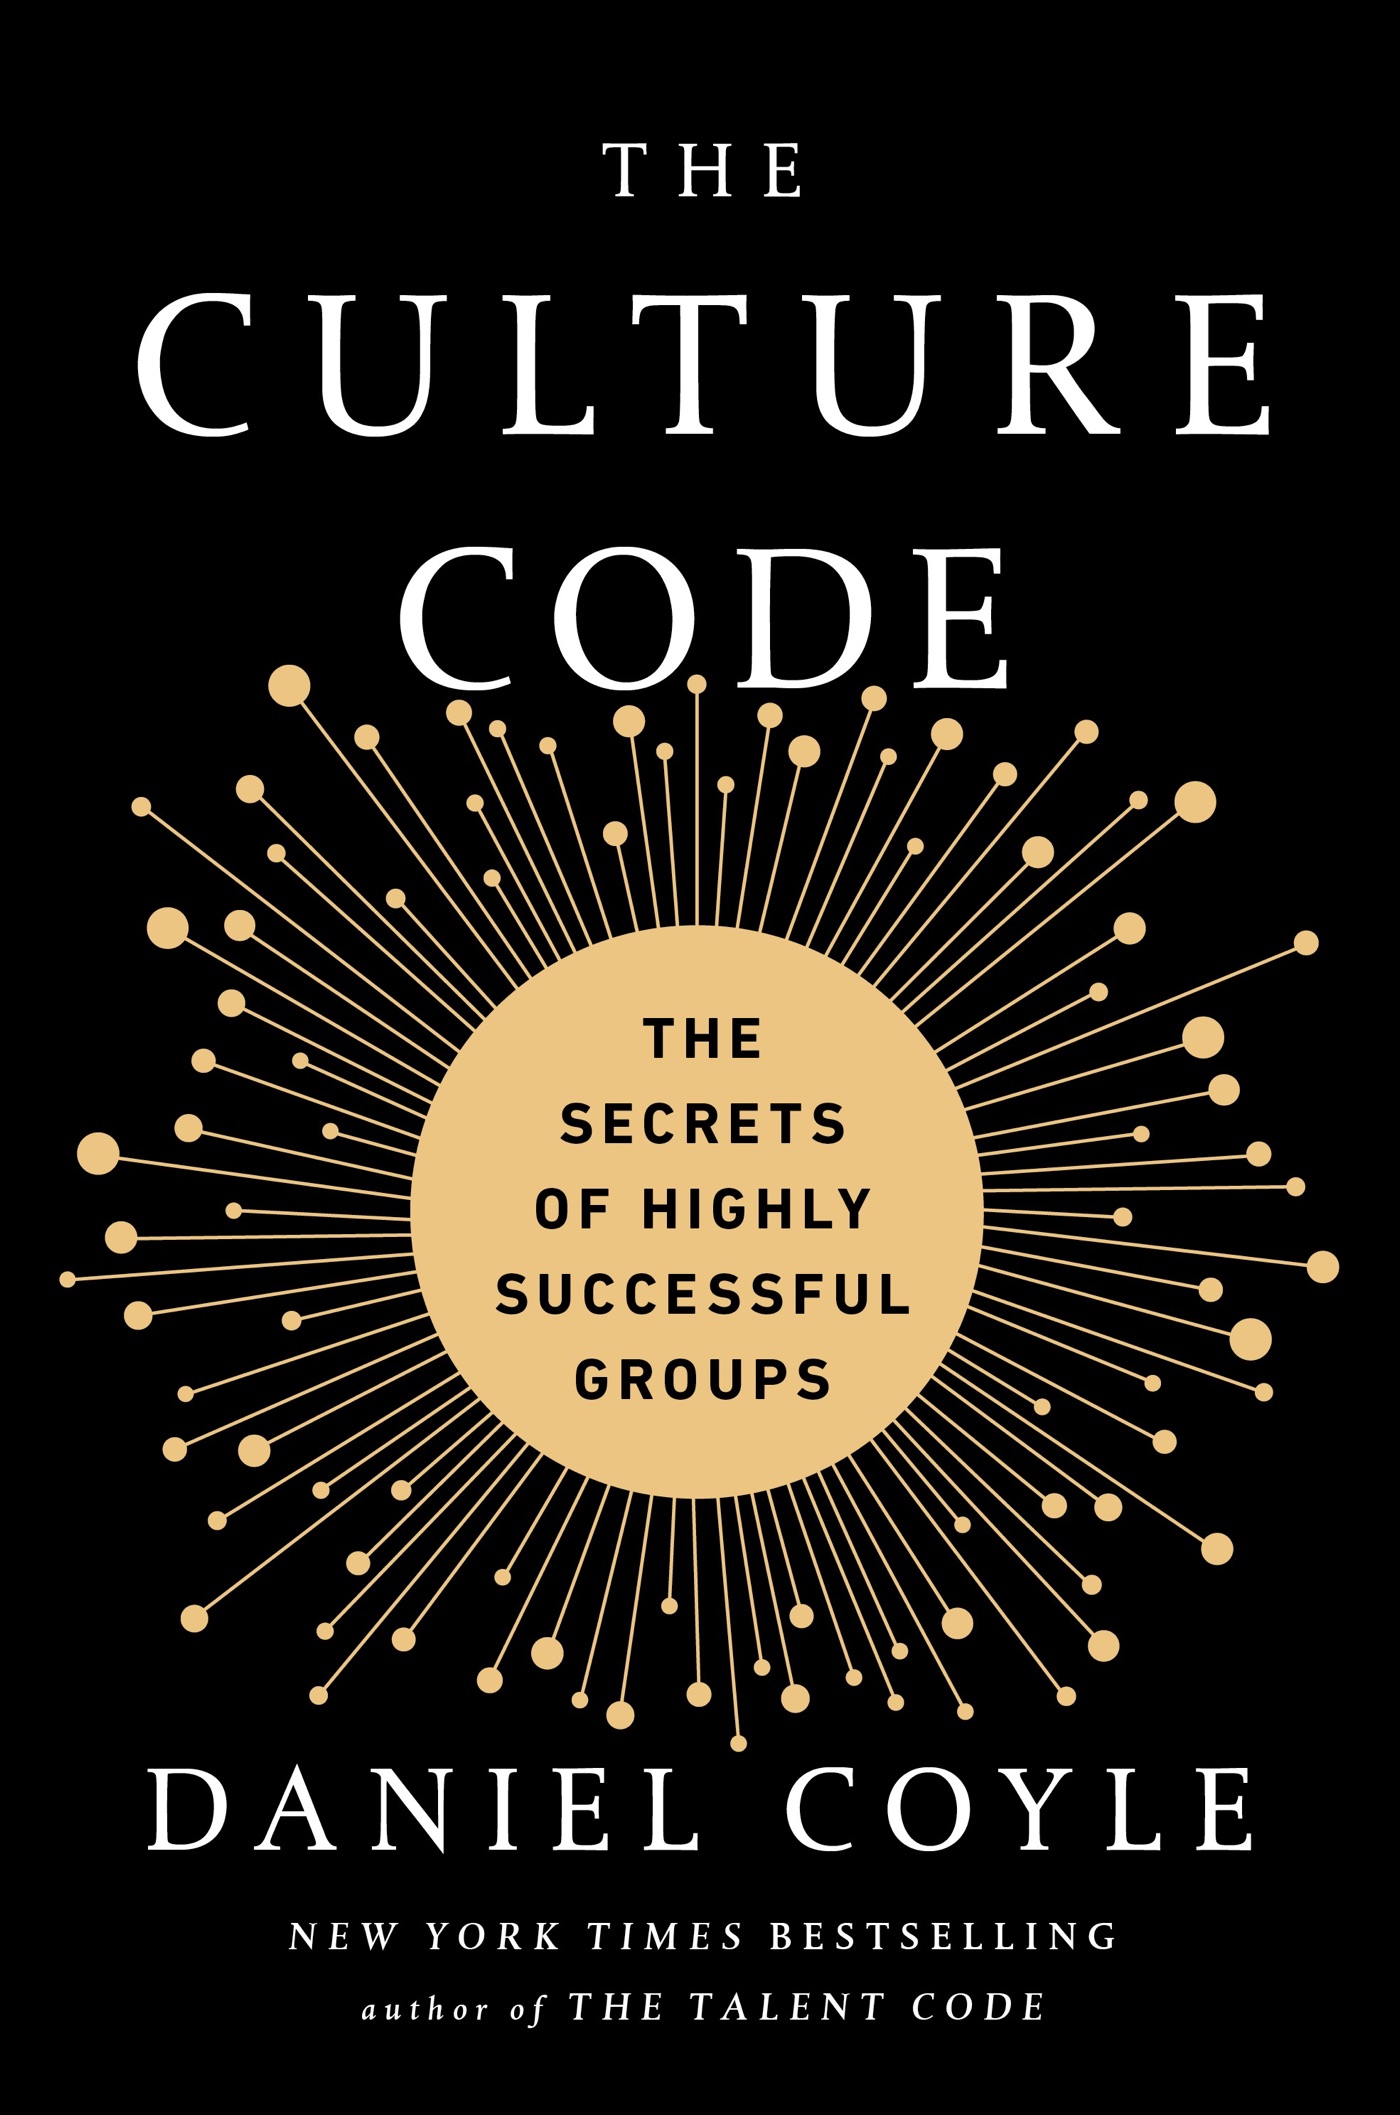 Book cover of "The Culture Code"